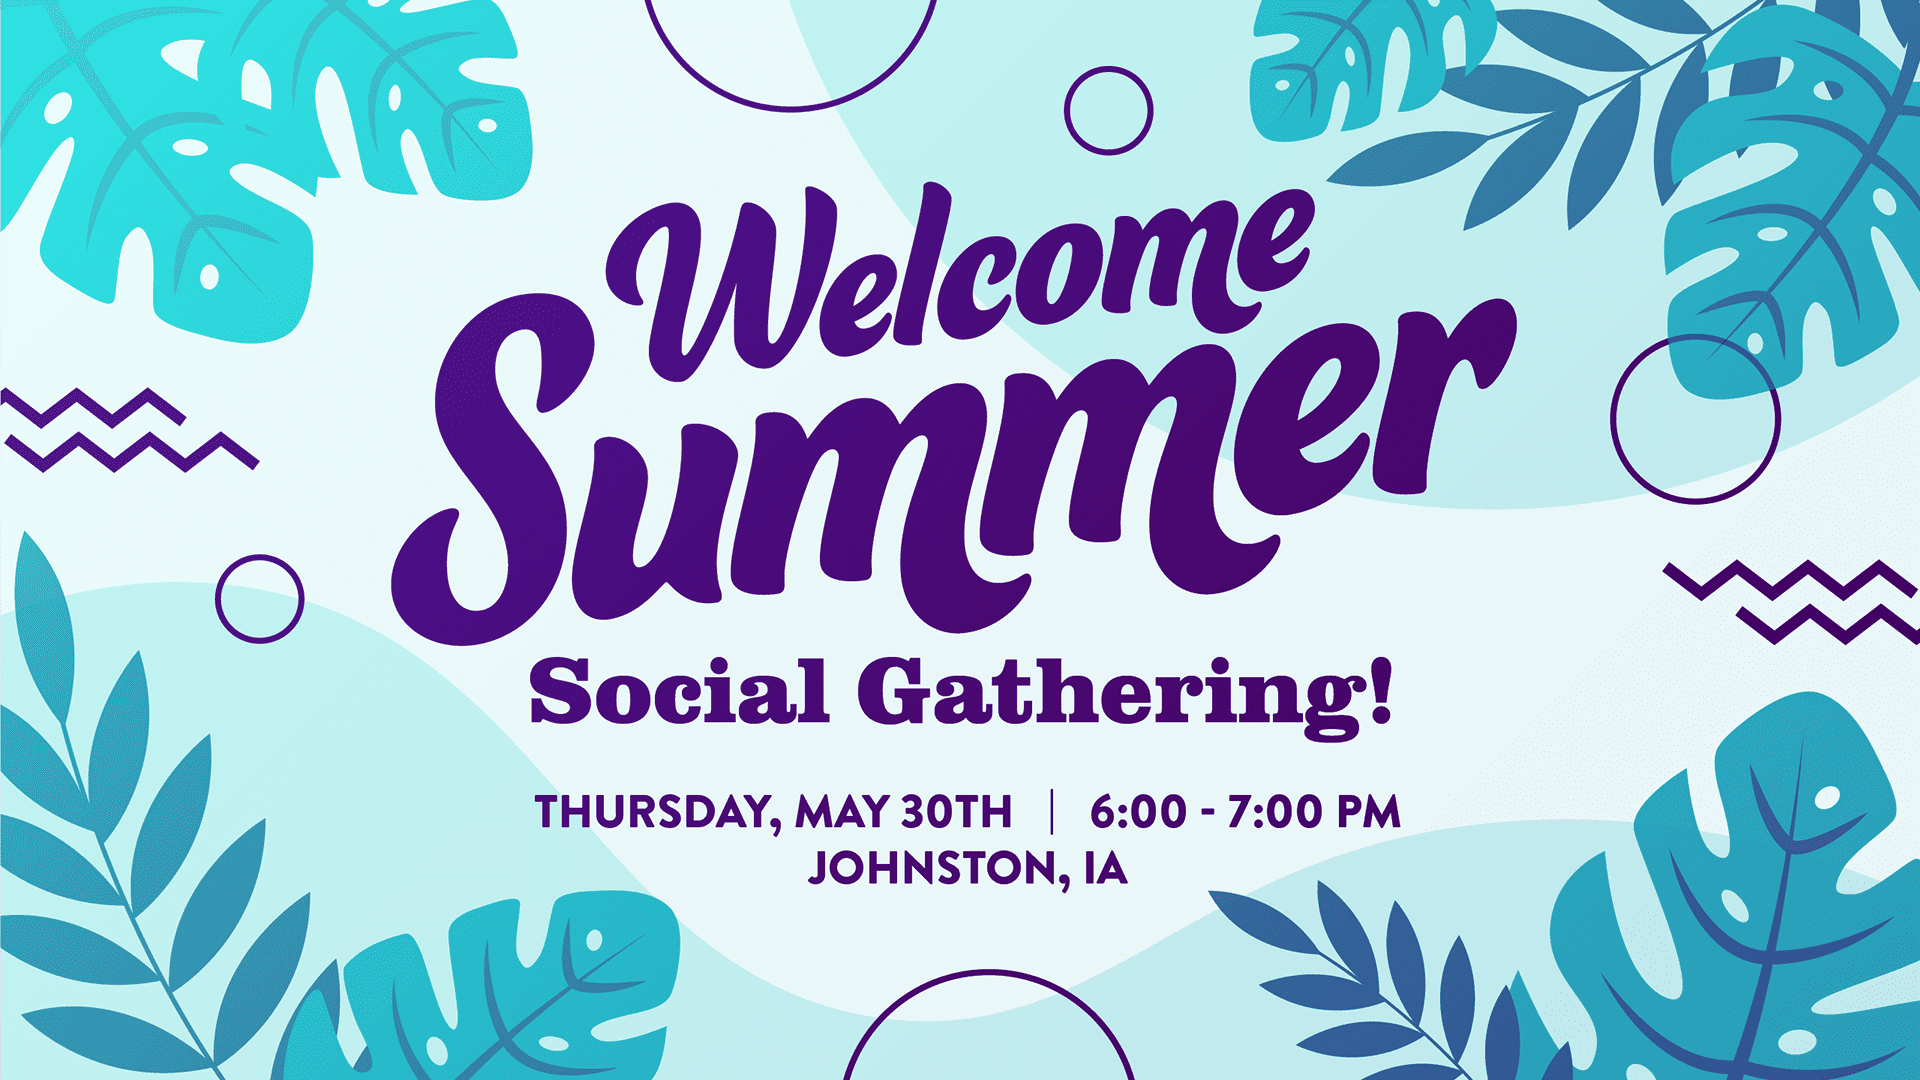 A vibrant digital poster featuring "Welcome Summer" in large purple letters, adorned with green tropical leaves and decorative elements, announcing a social gathering on May 30th from 6-7 PM in Johnston, IA.